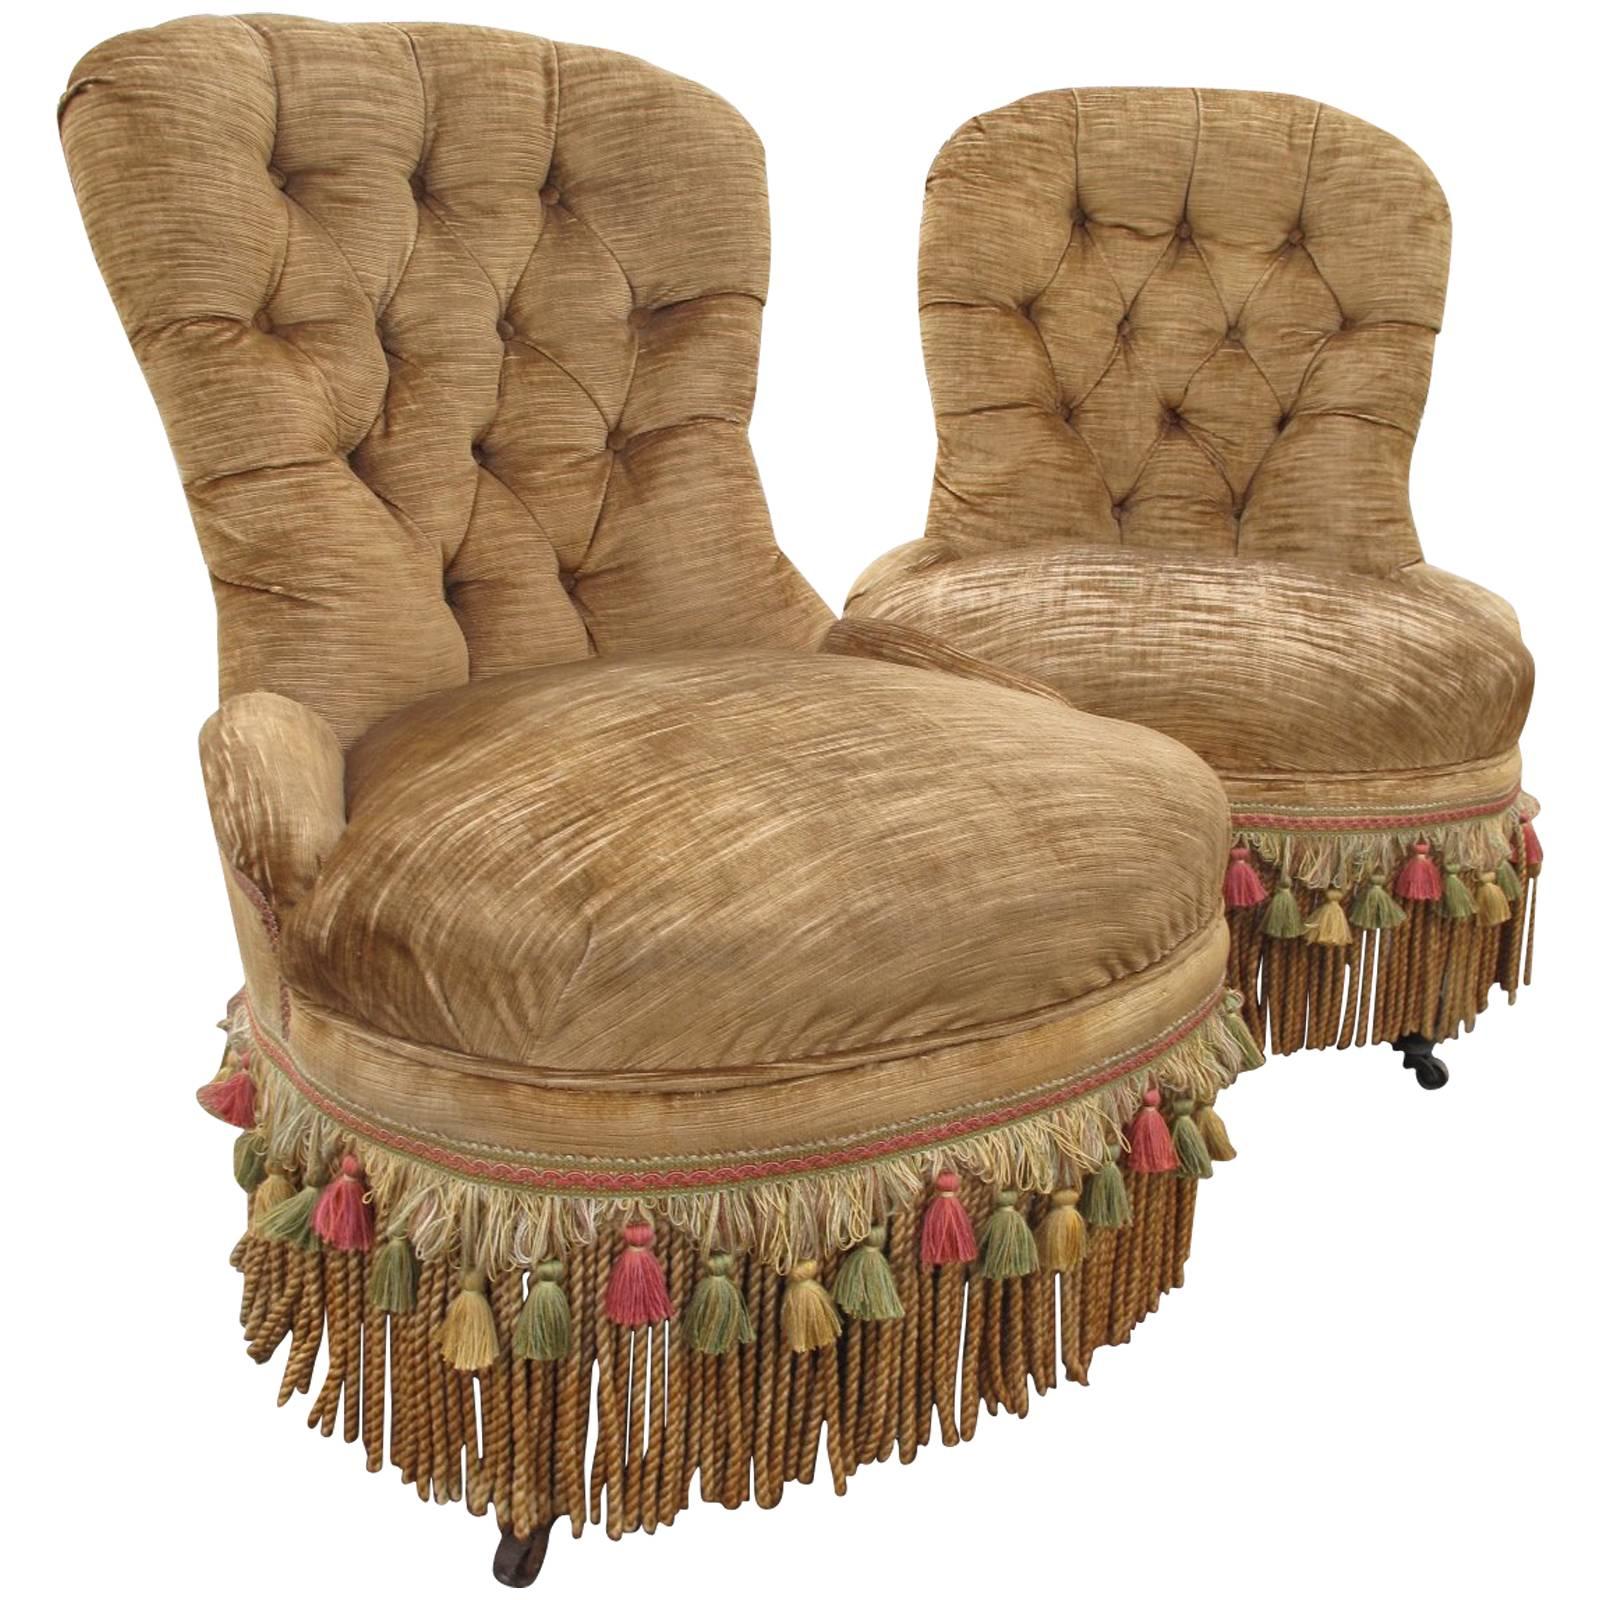 Pair of 19th Century Tufted Slipper Chairs